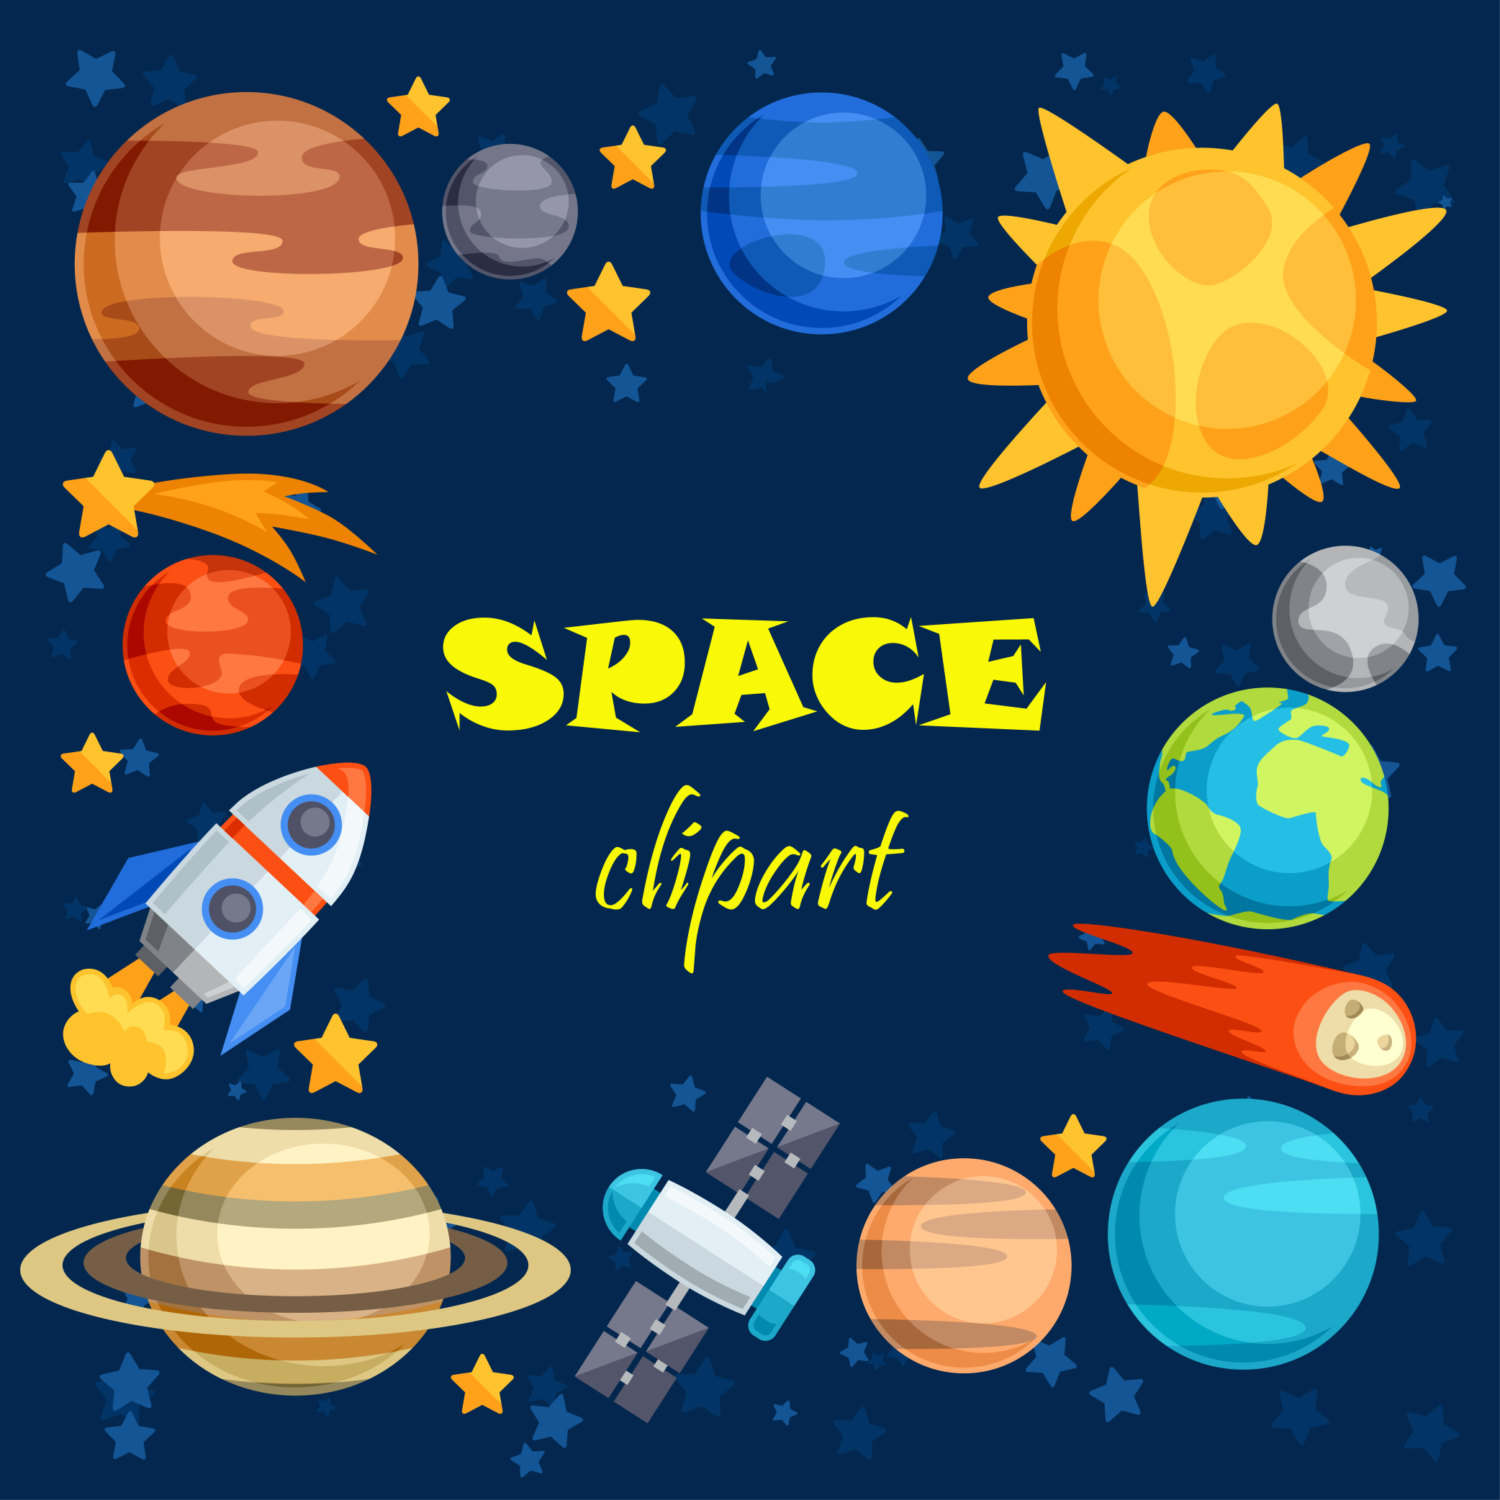 Outer space clipart:u0026quot